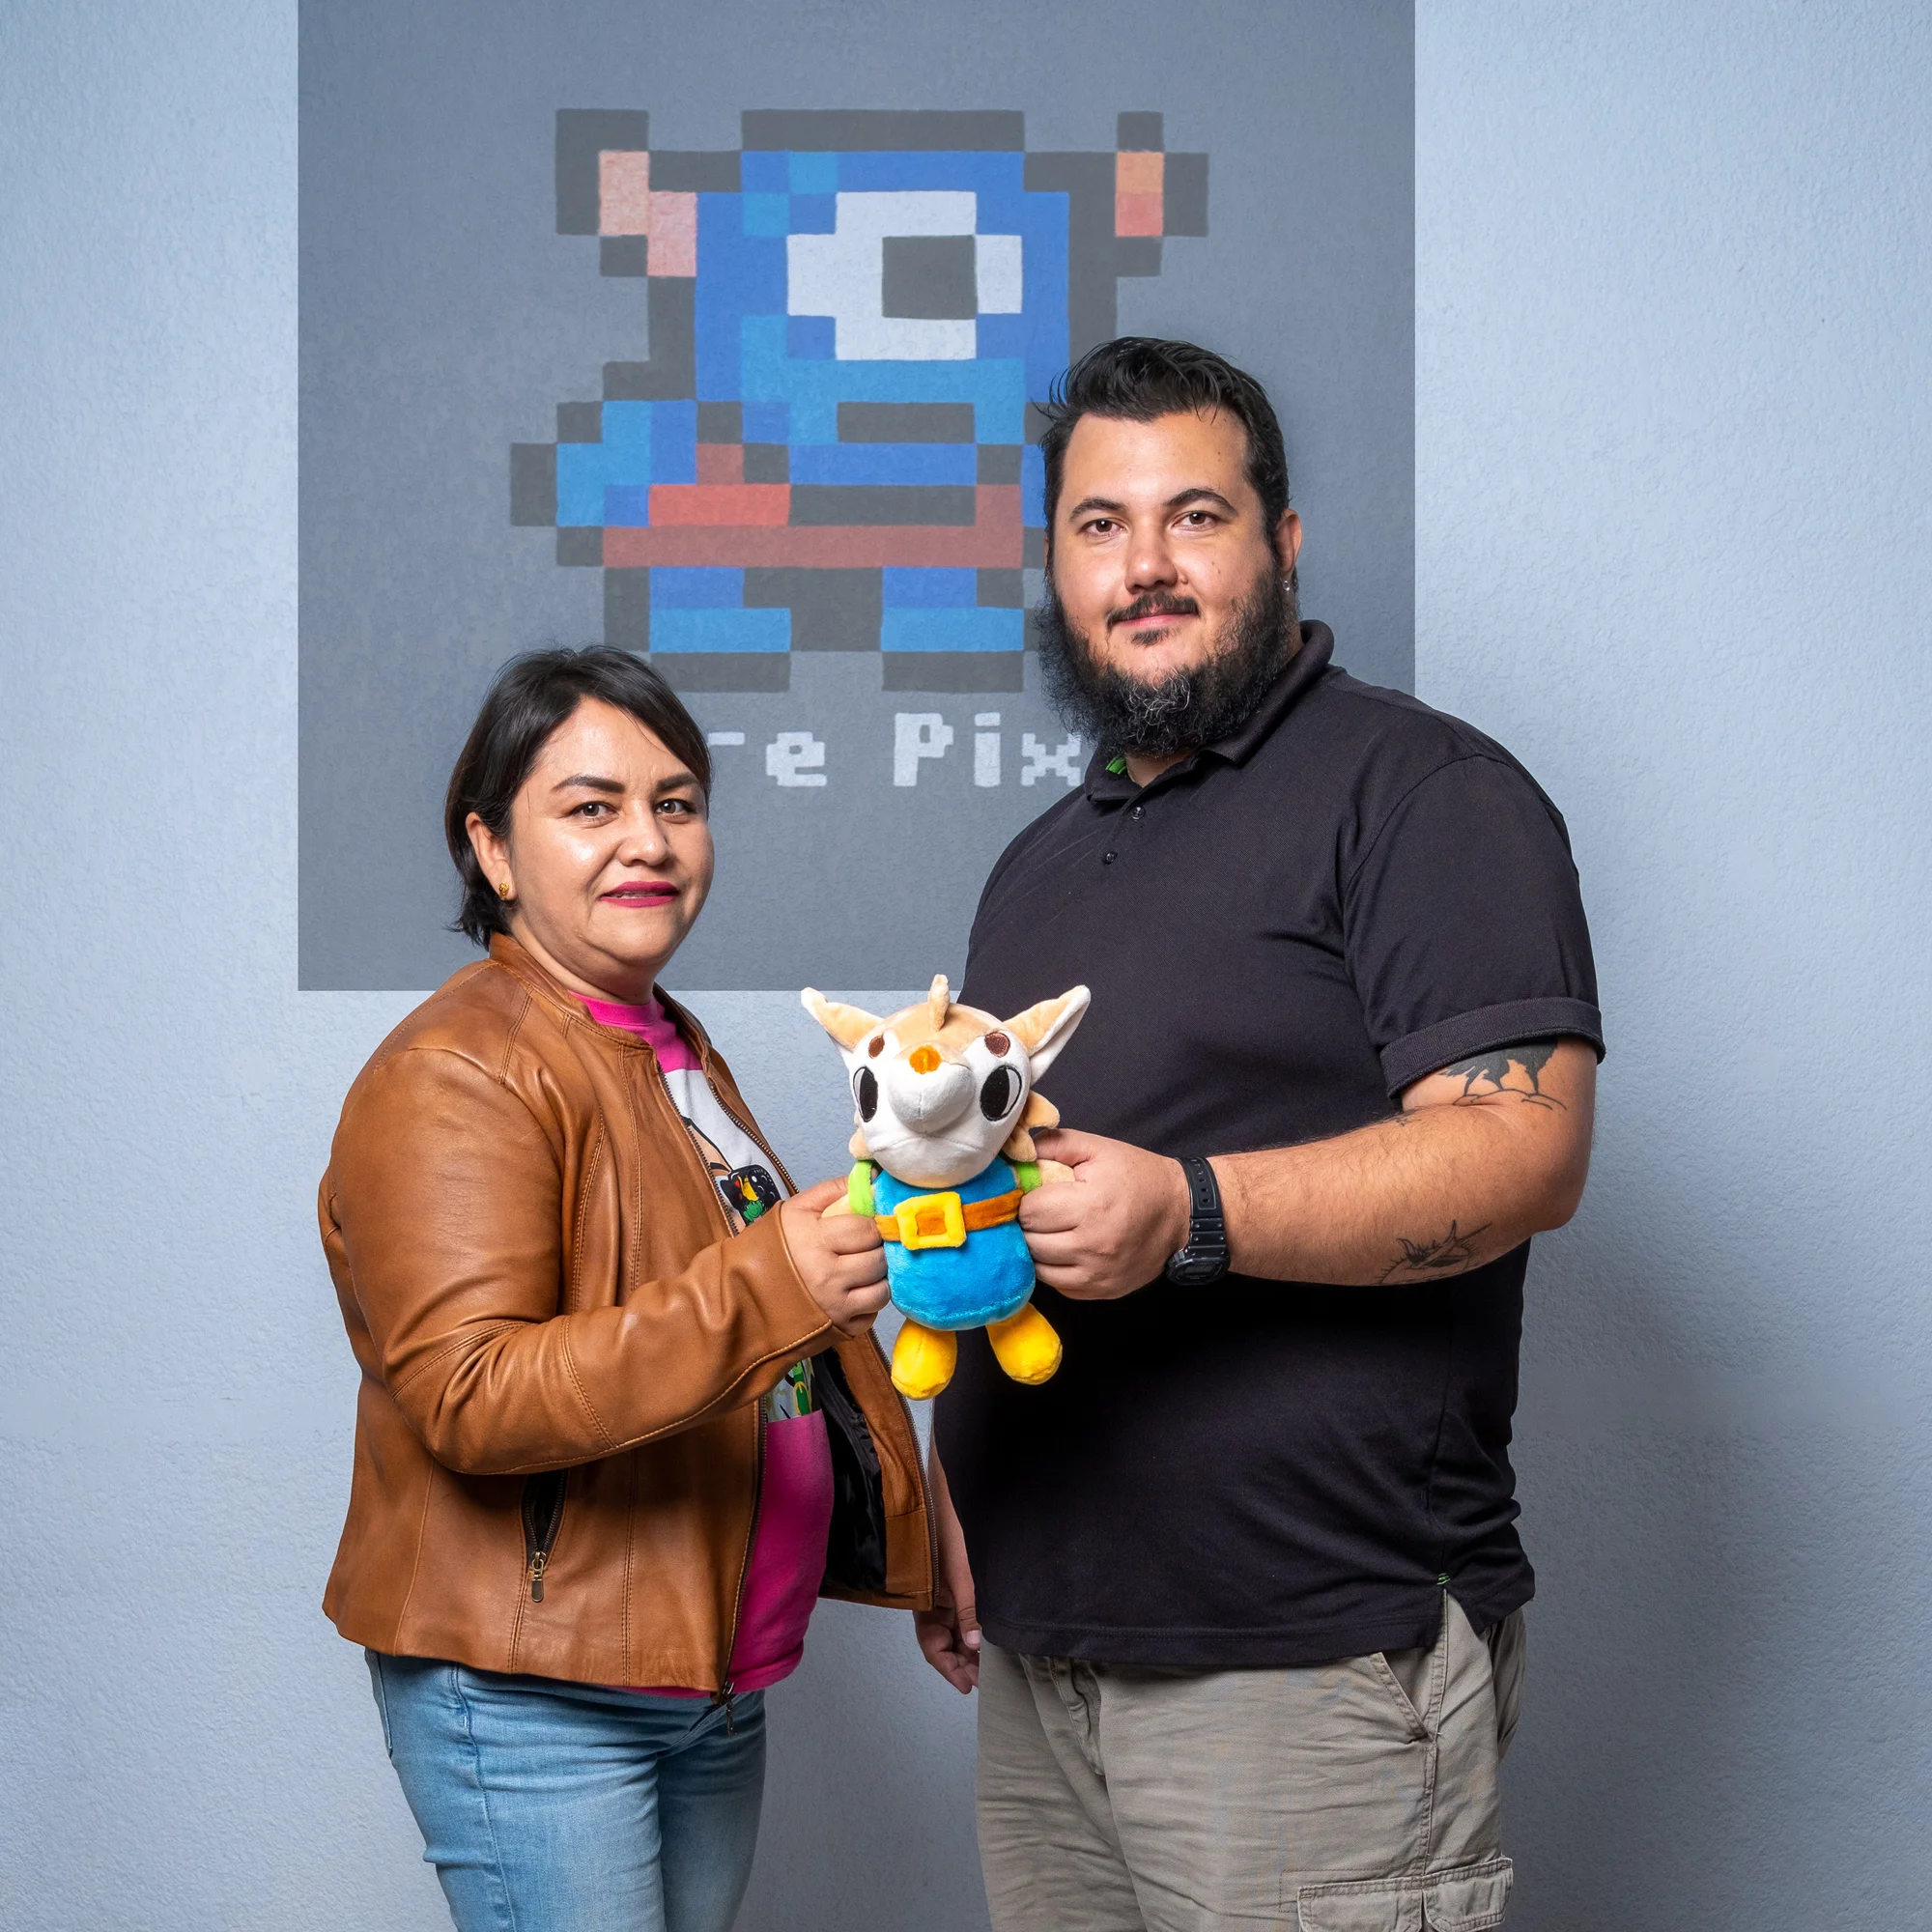 Two people stand in front of a sign with the Ogre Pixel logo  and hold a plush toy character.